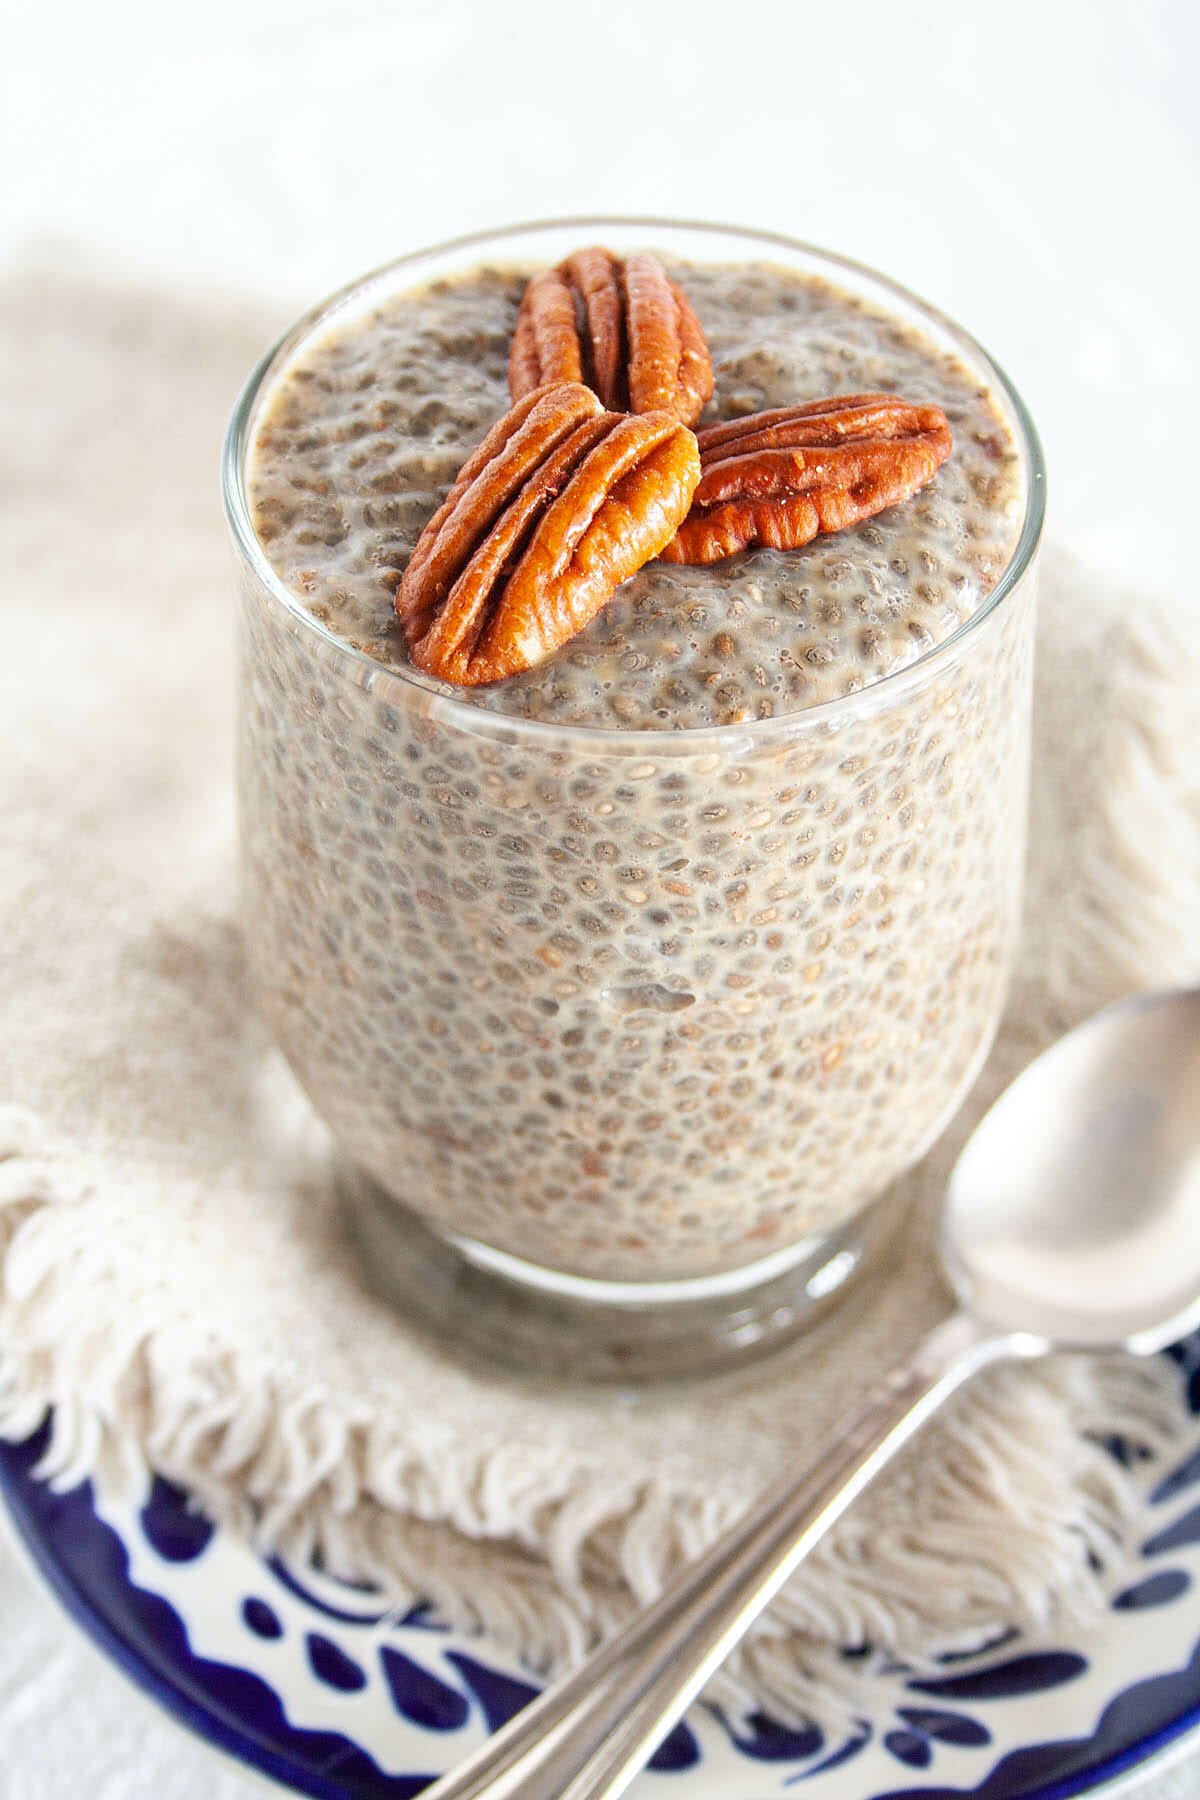 Gingerbread Chia Pudding with pecans on top.